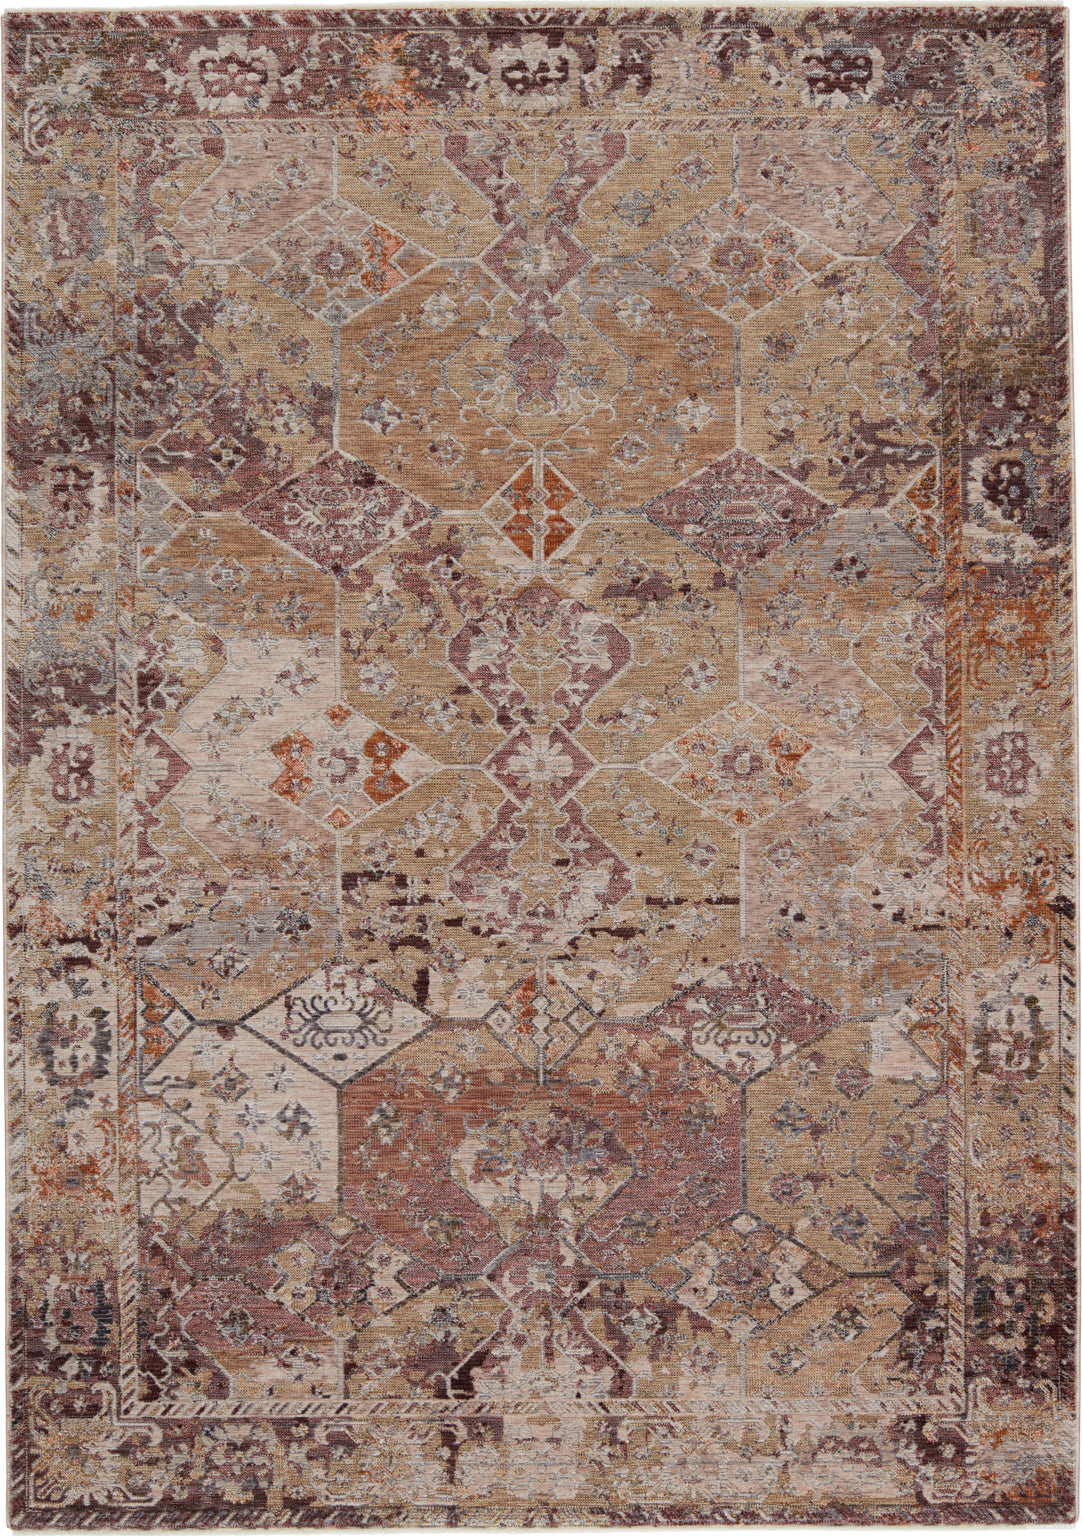 Jaipur Living Valentia Thessaly VLN11 Gold/Maroon Area Rug - Top Down